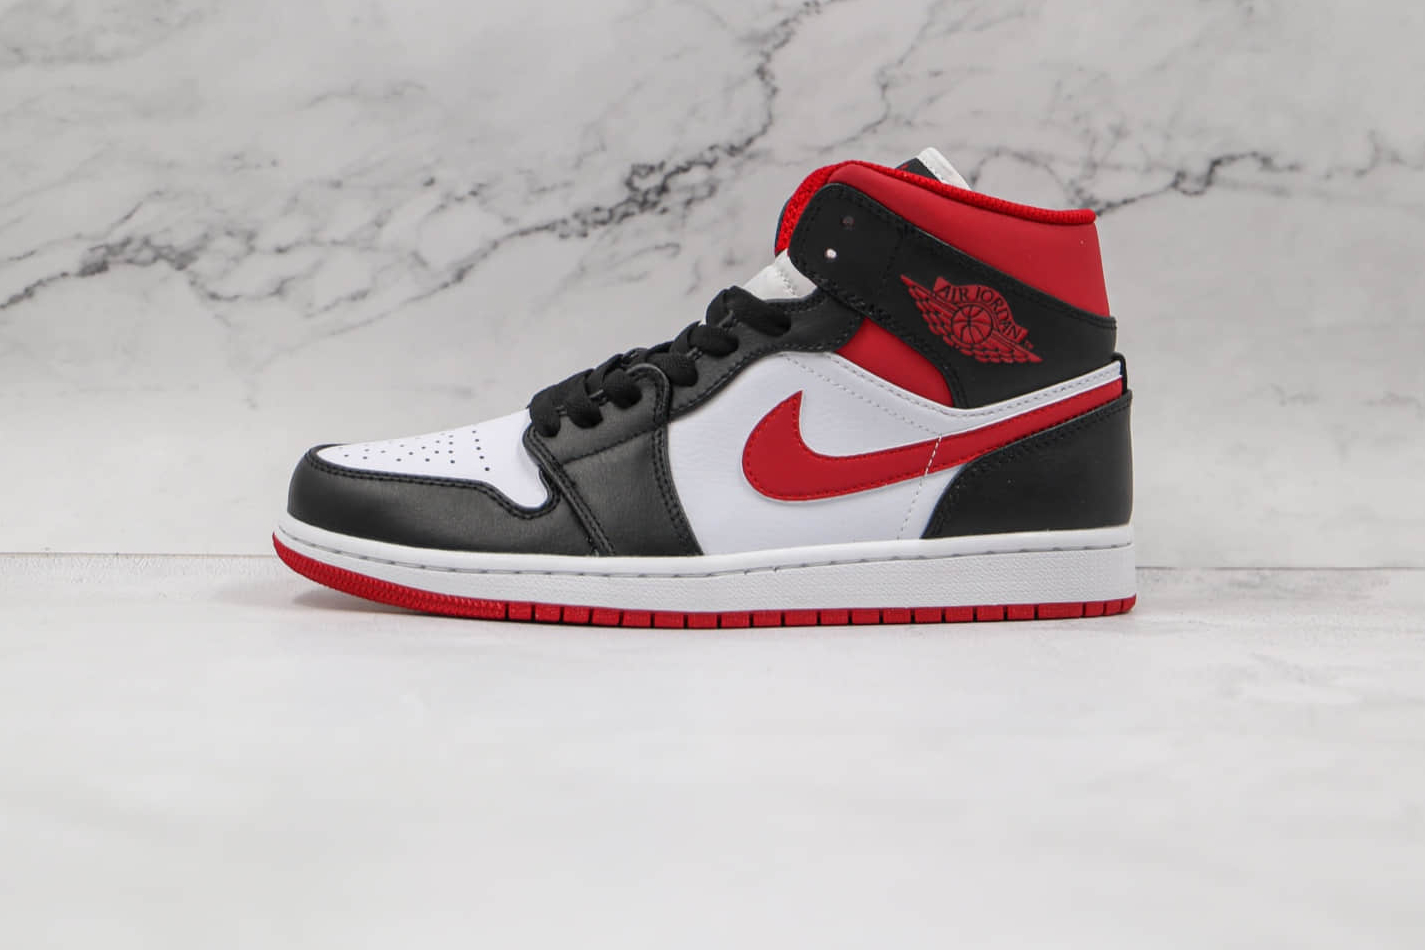 Air Jordan 1 Mid Black White Gym Red 554724-122 - Classic Style with a Bold Twist